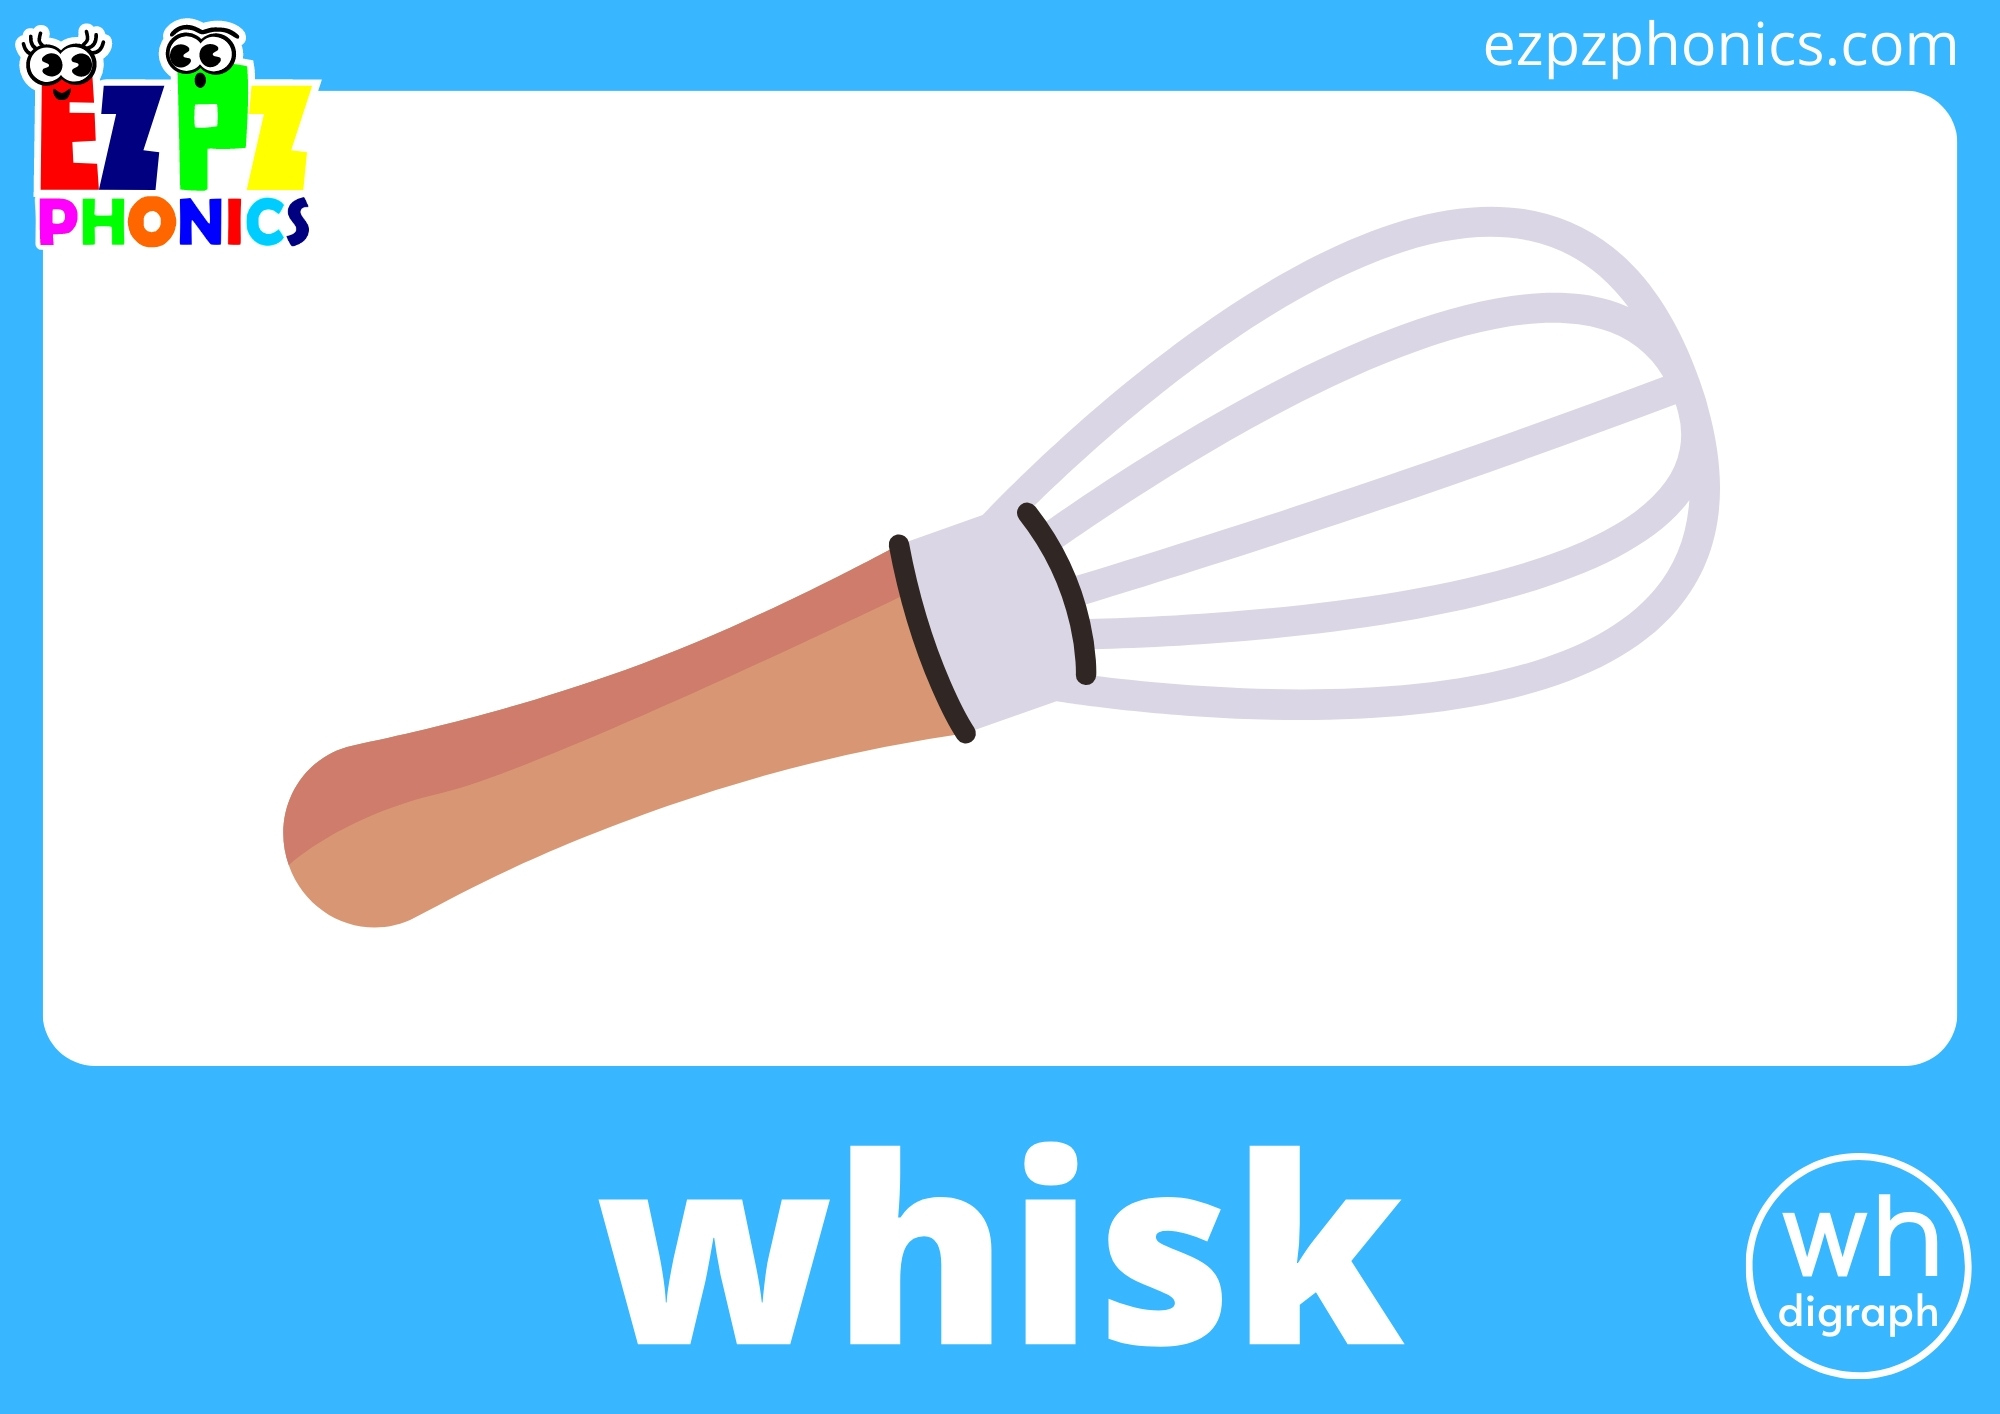 wh-digraph-flashcards-ezpzphonics